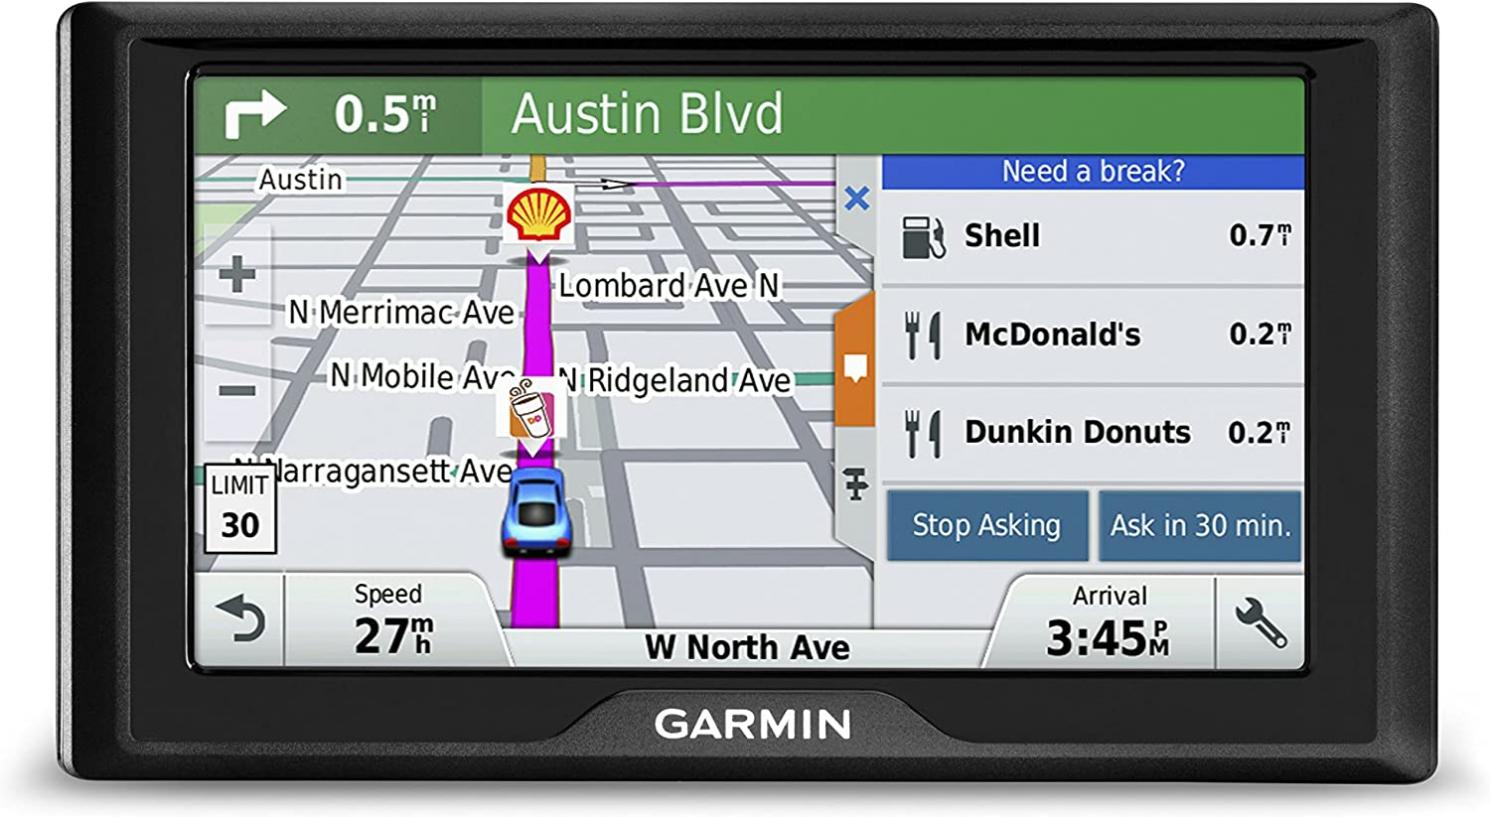 Garmin Drive 60 USA LM GPS Navigator System with Lifetime Maps, Spoken Turn-By-Turn Directions, Direct Access, Driver Alerts, and Foursquare Data